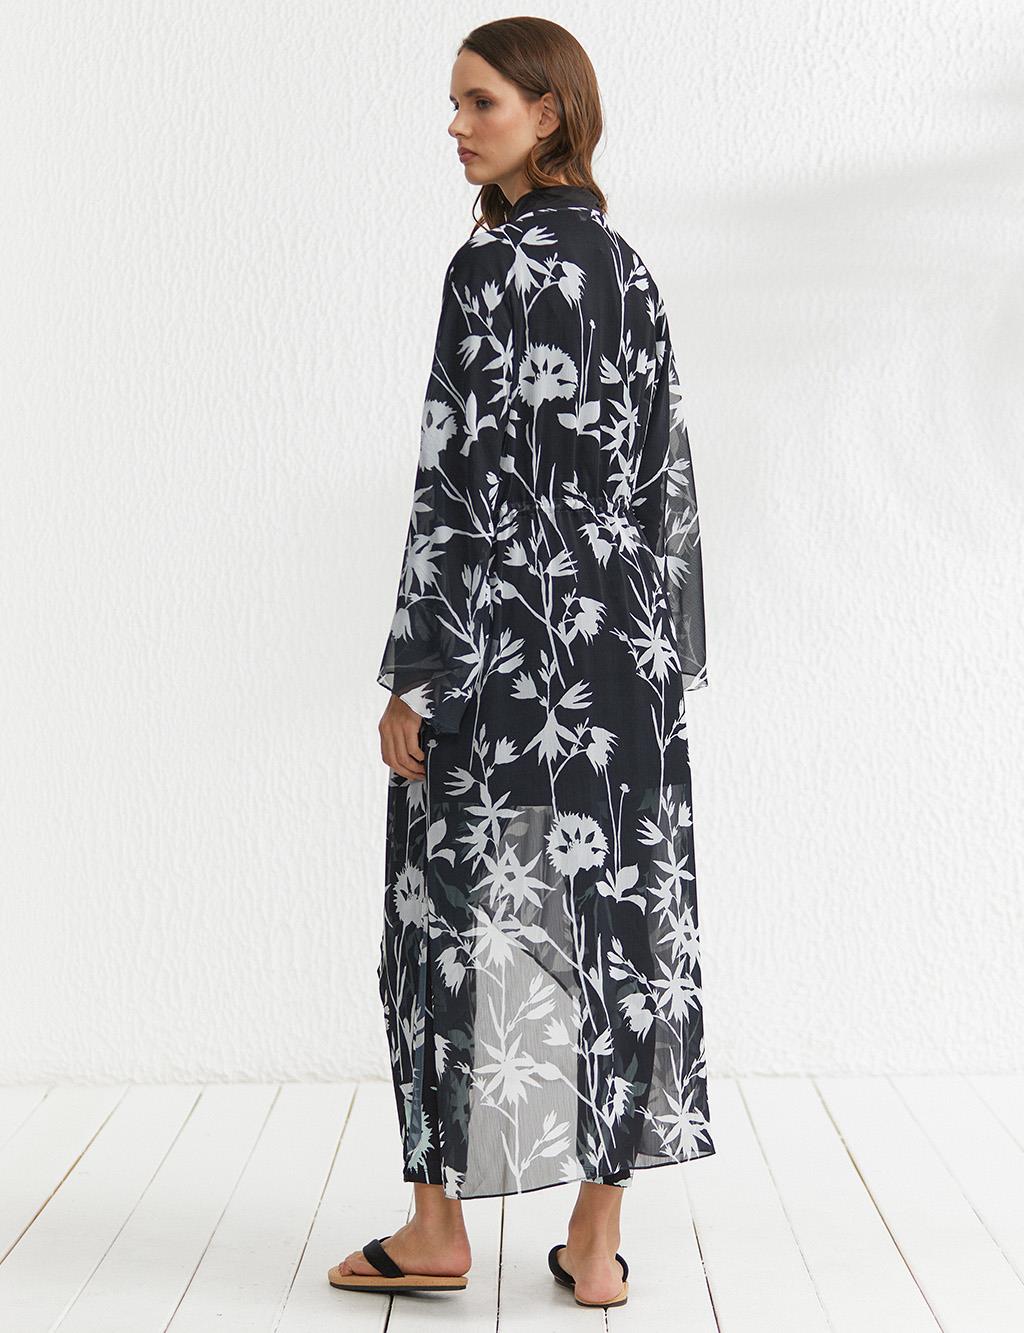 Floral Patterned Pareo Black